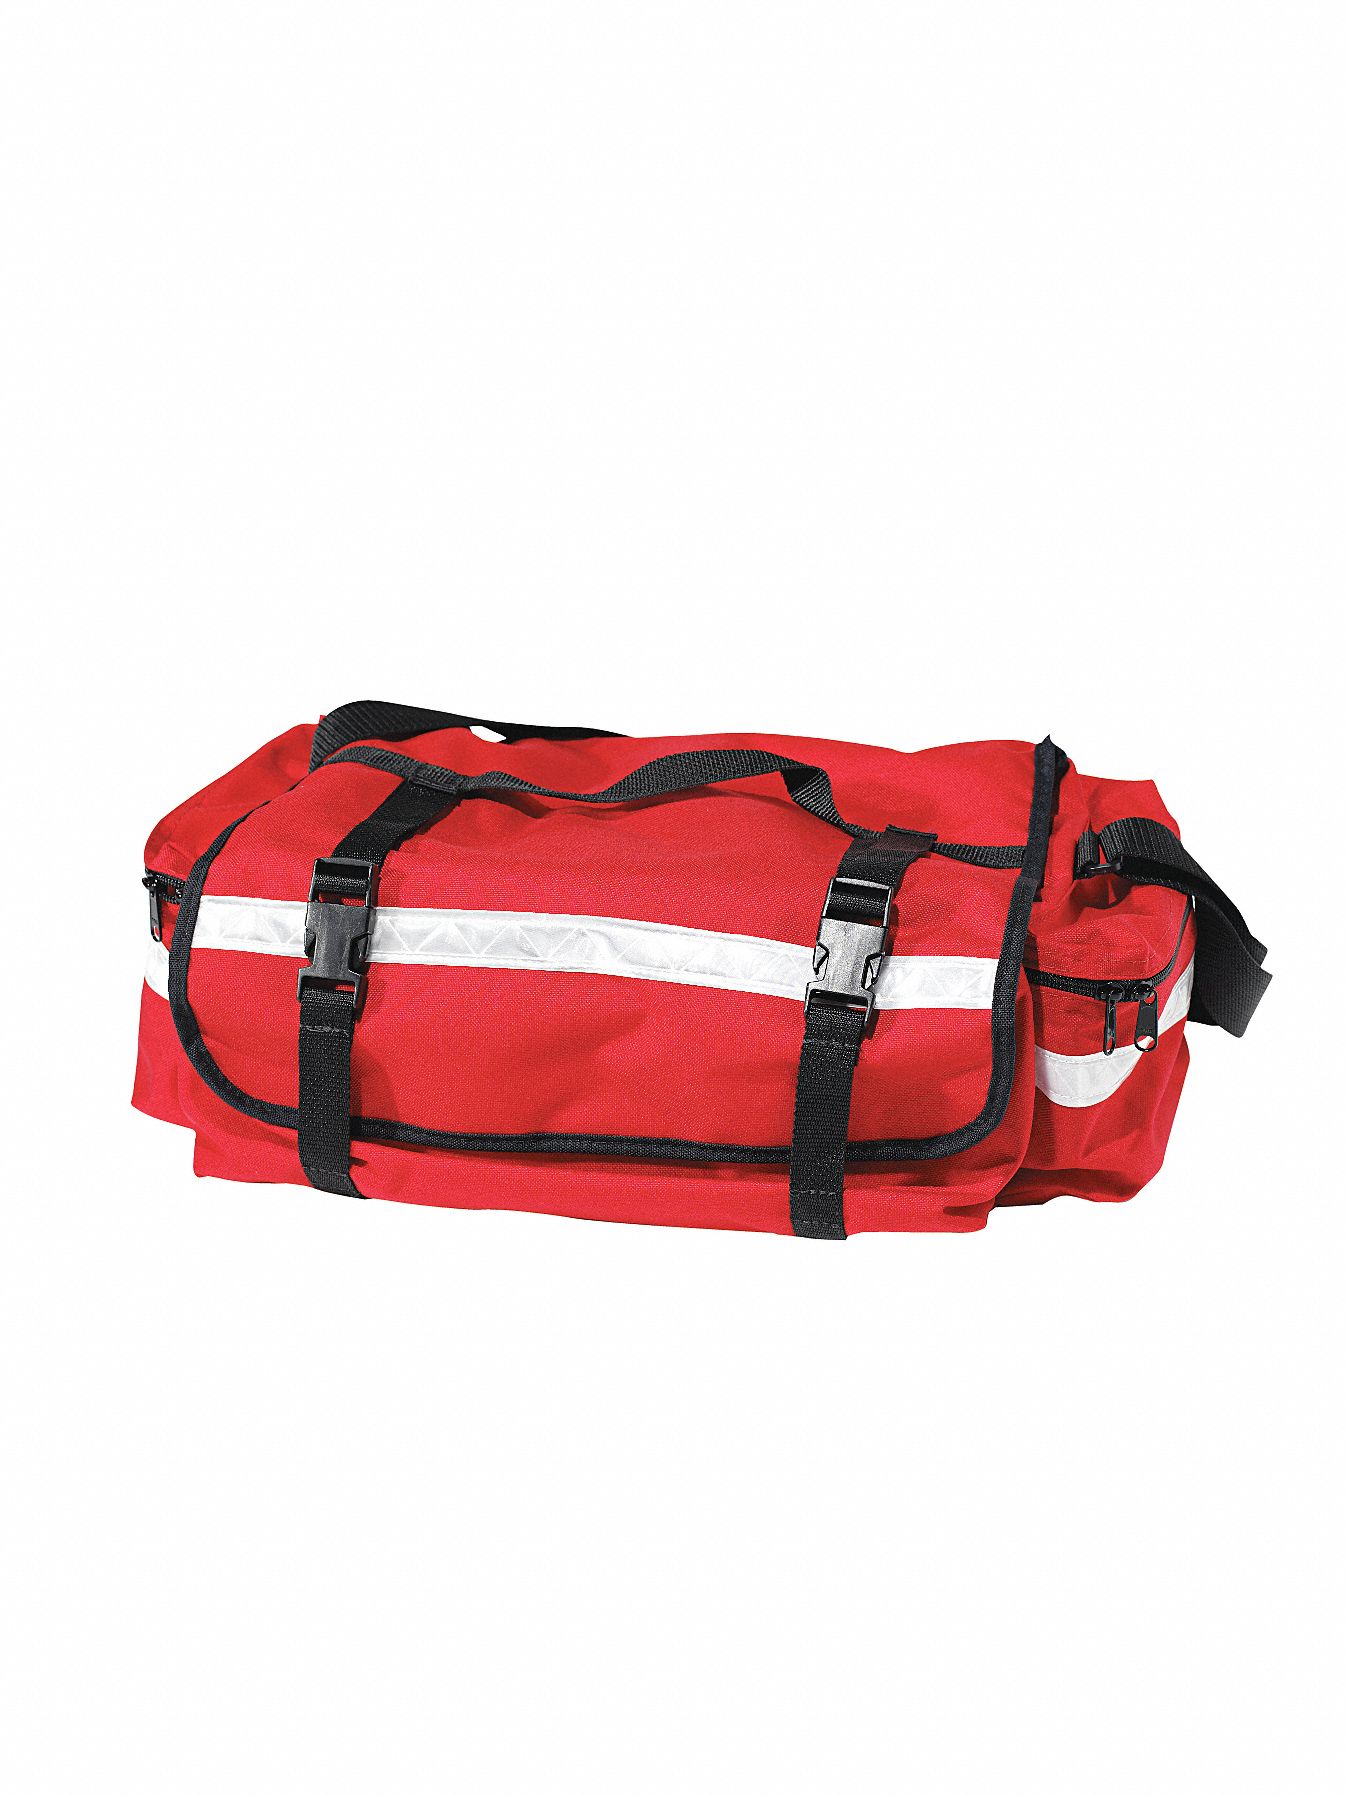 Trauma Kit Bag,  50 People Served,  Number of Components 267,  Number of Pockets 3